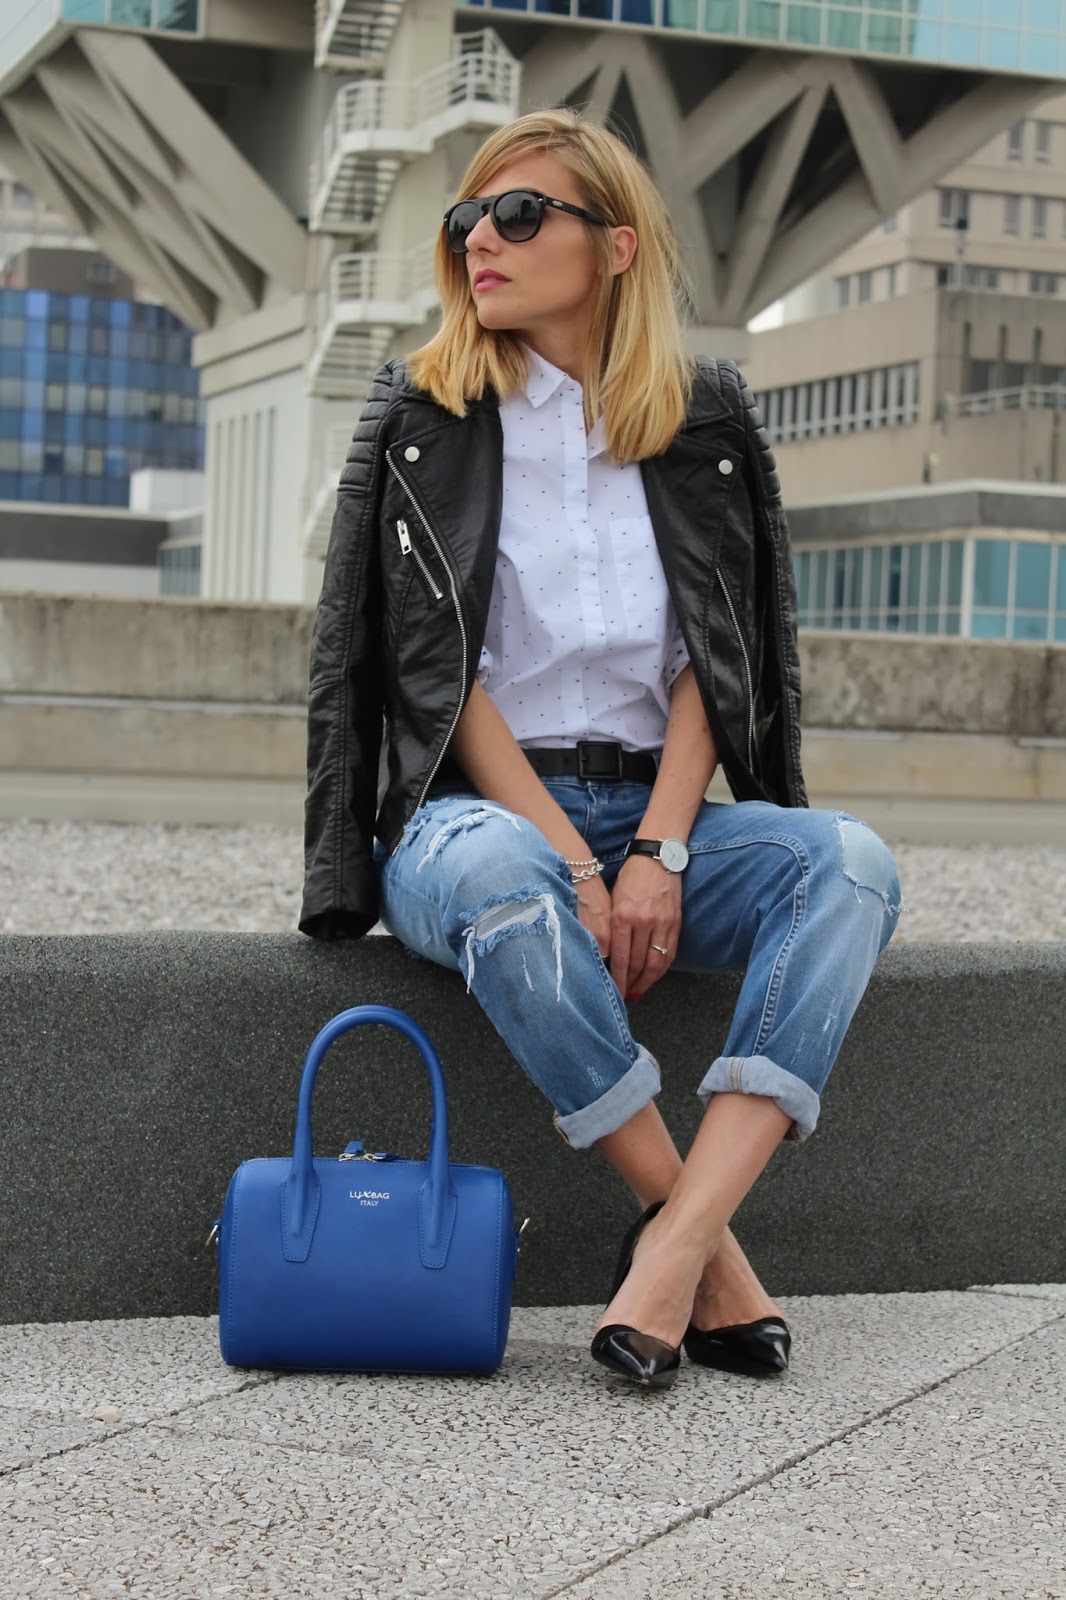 Eniwhere Fashion - H&M leather jacket and LuxBag